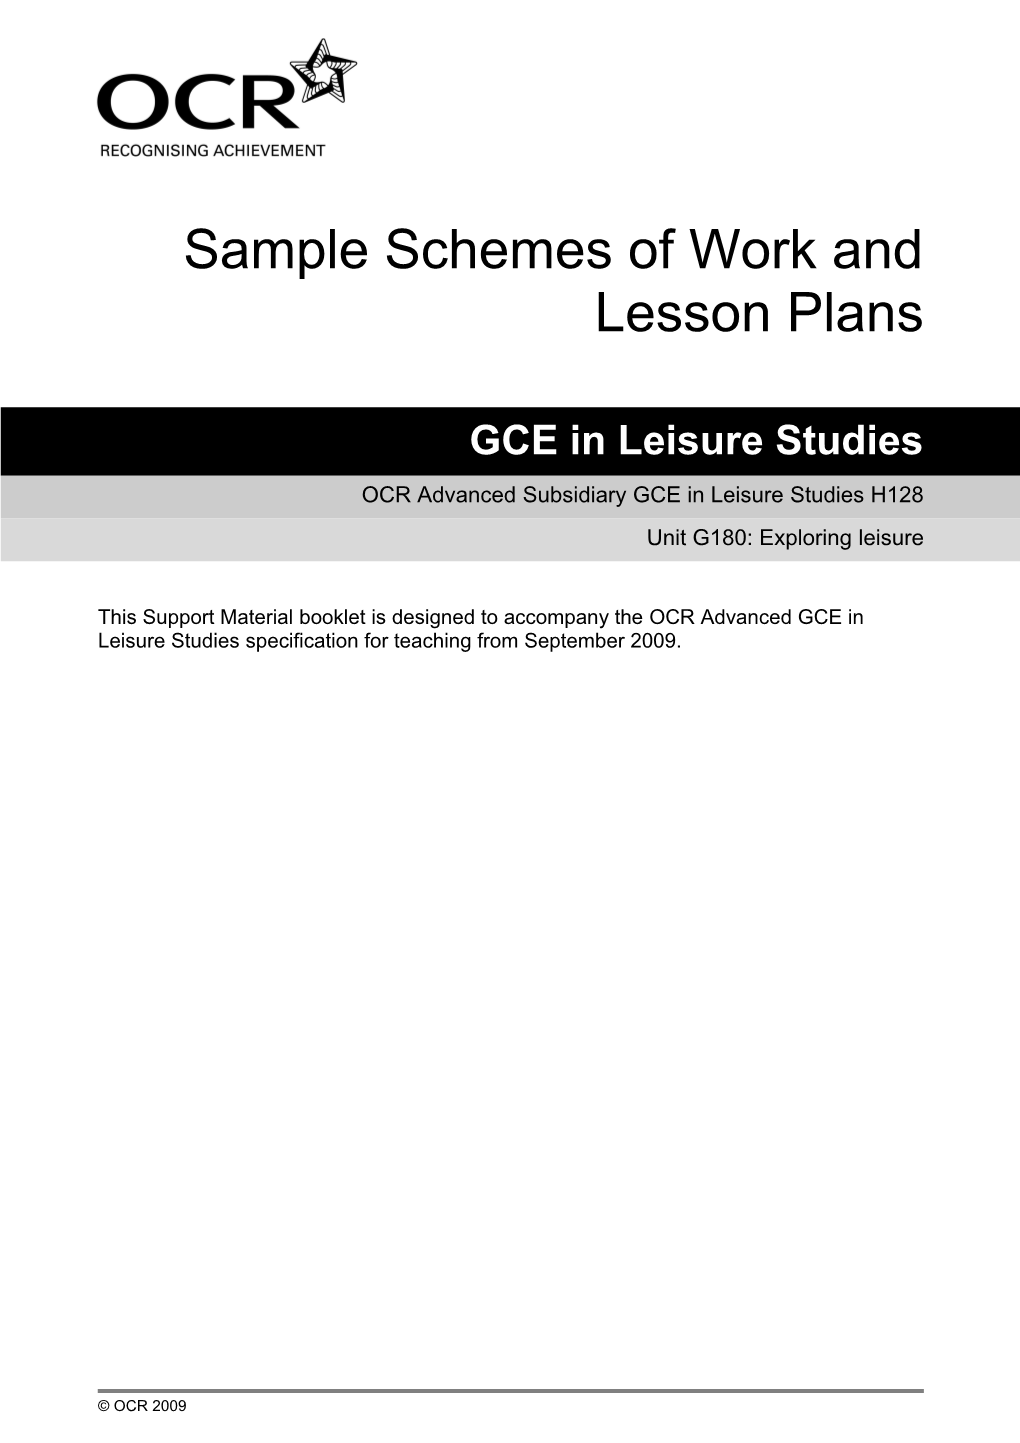 Sample Schemes of Work and Lesson Plans